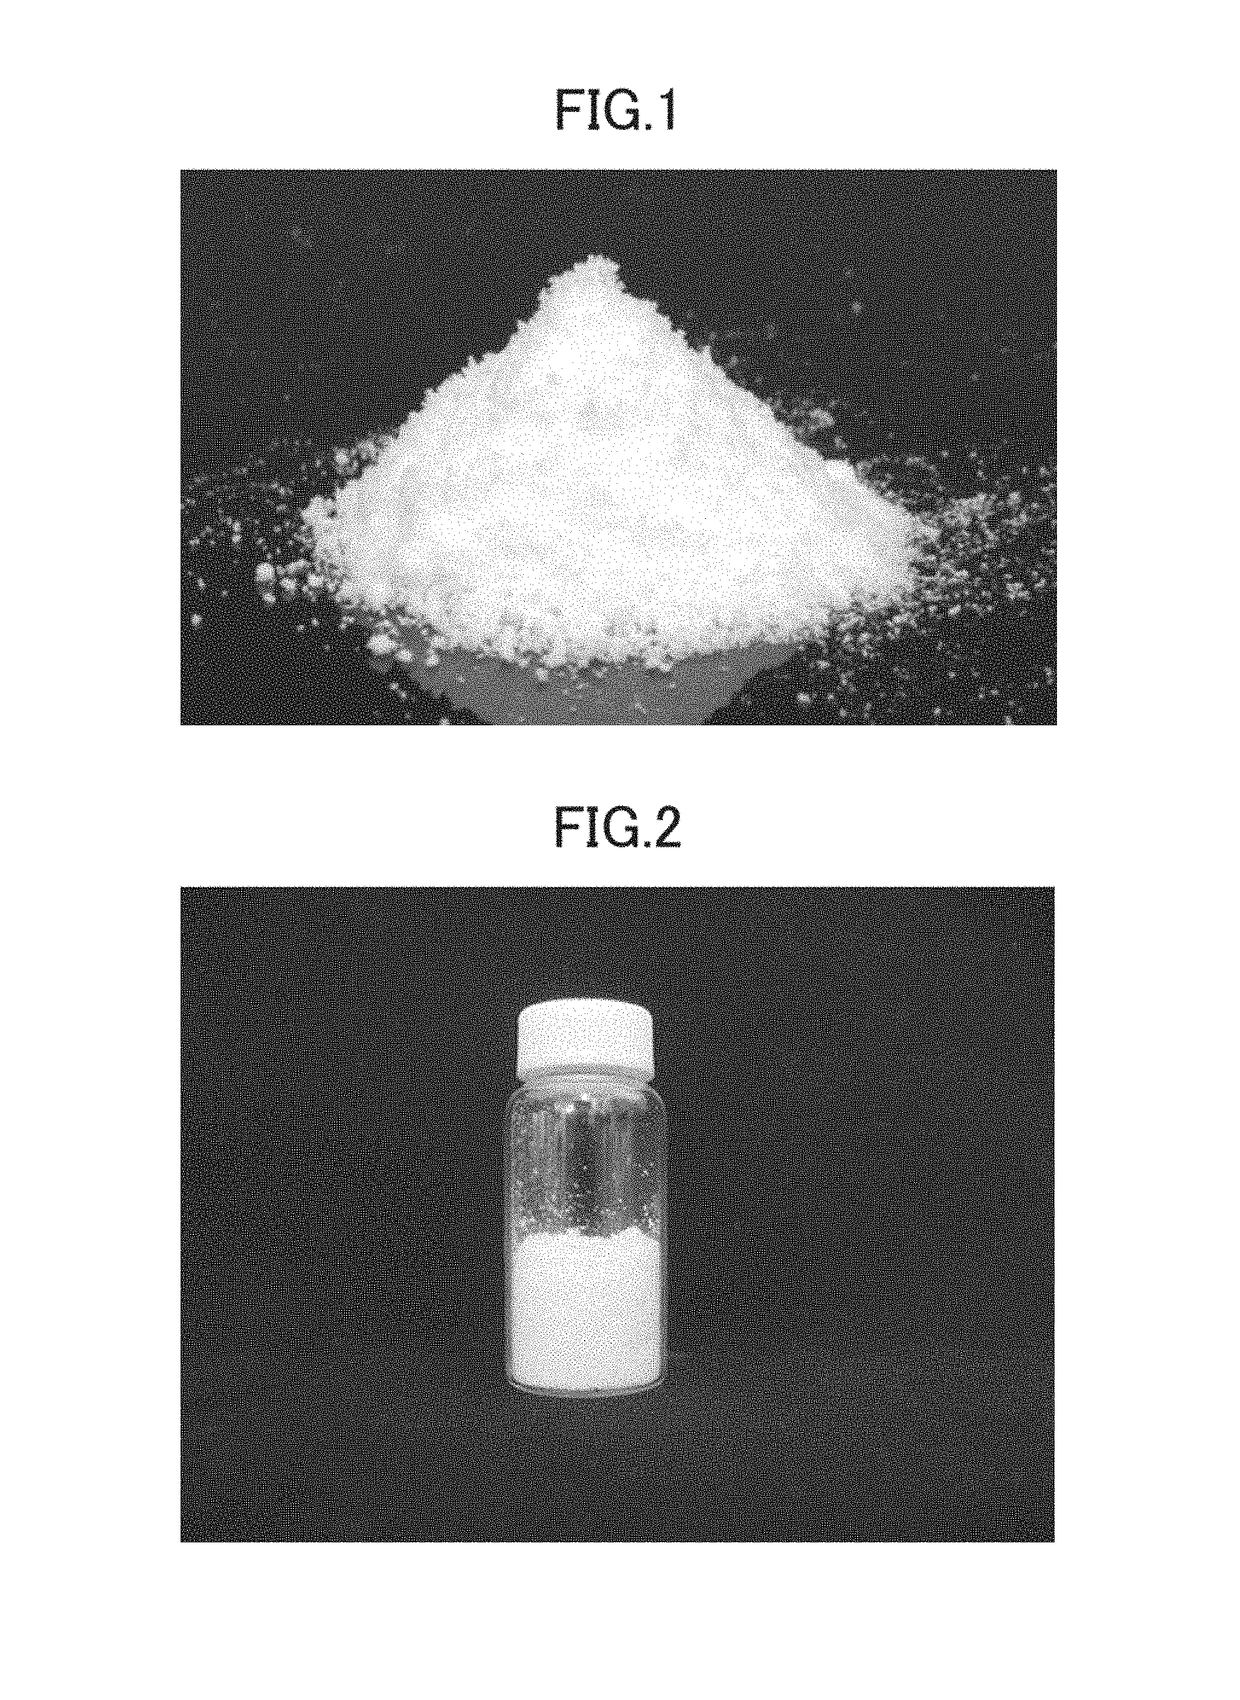 Powdered fat/oil composition, food including powdered fat/oil composition, and methods for producing same